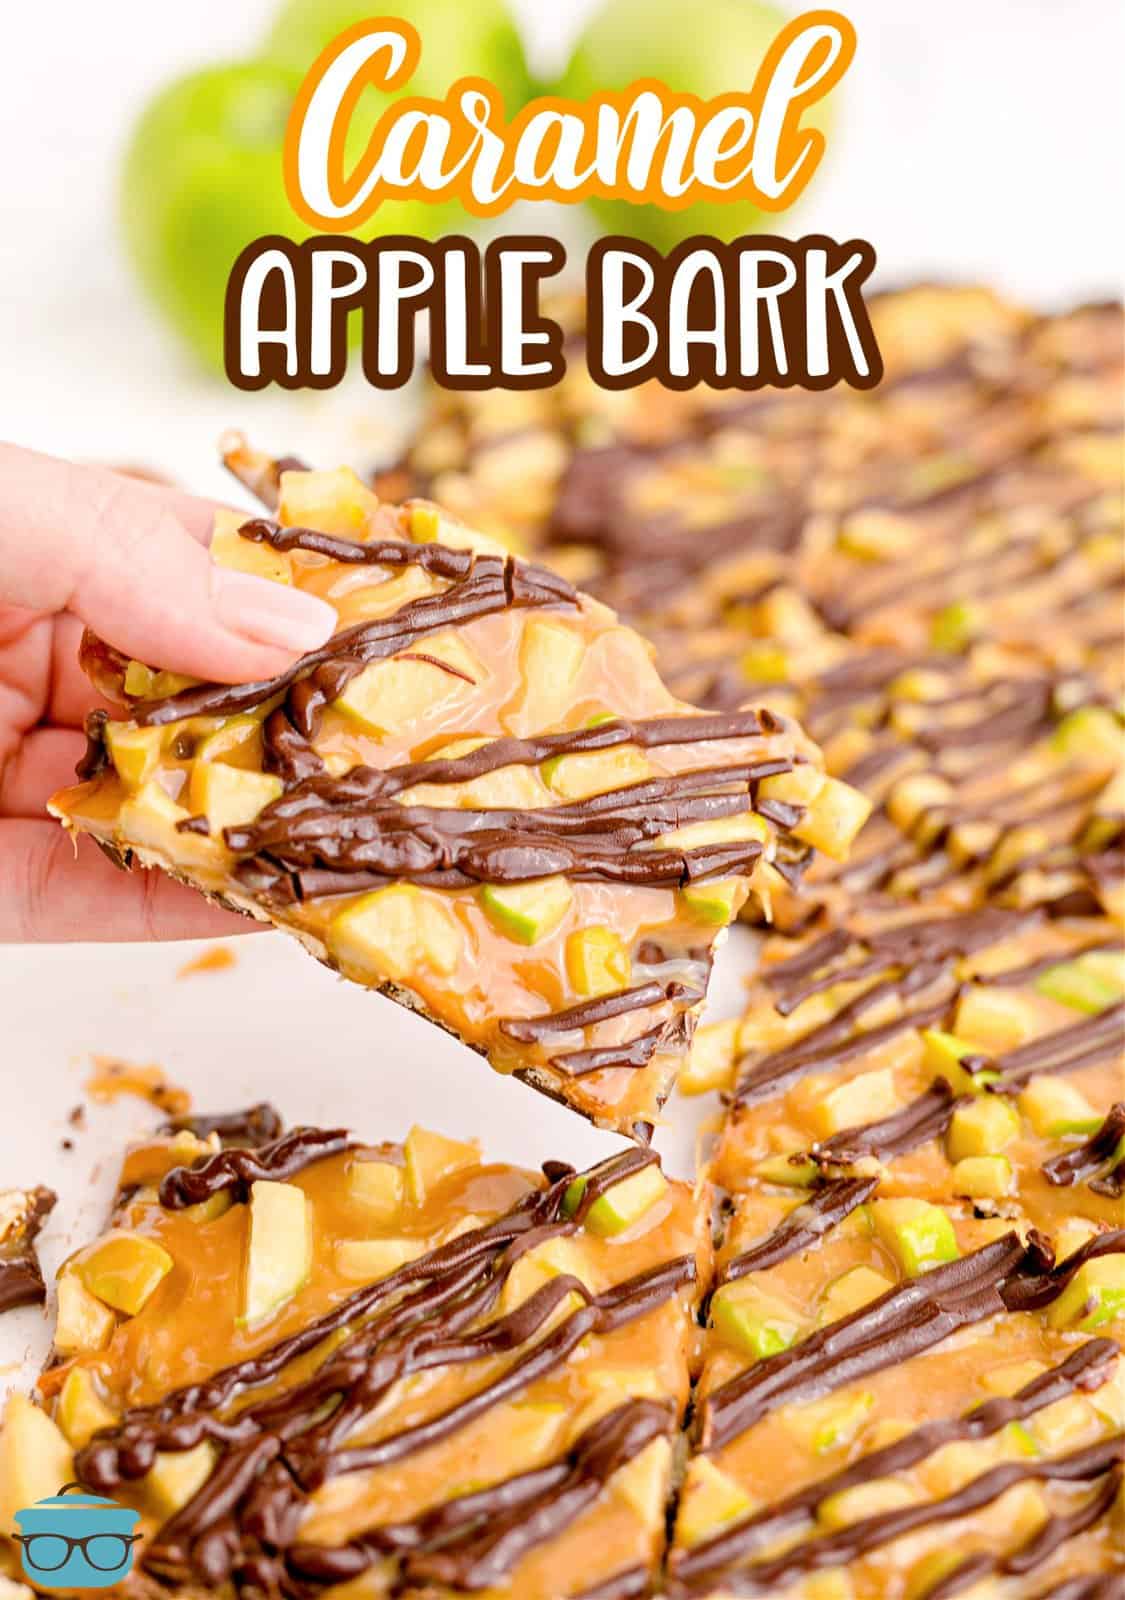 Pinterest image of a hand holding up a slice of the Caramel Apple Bark.